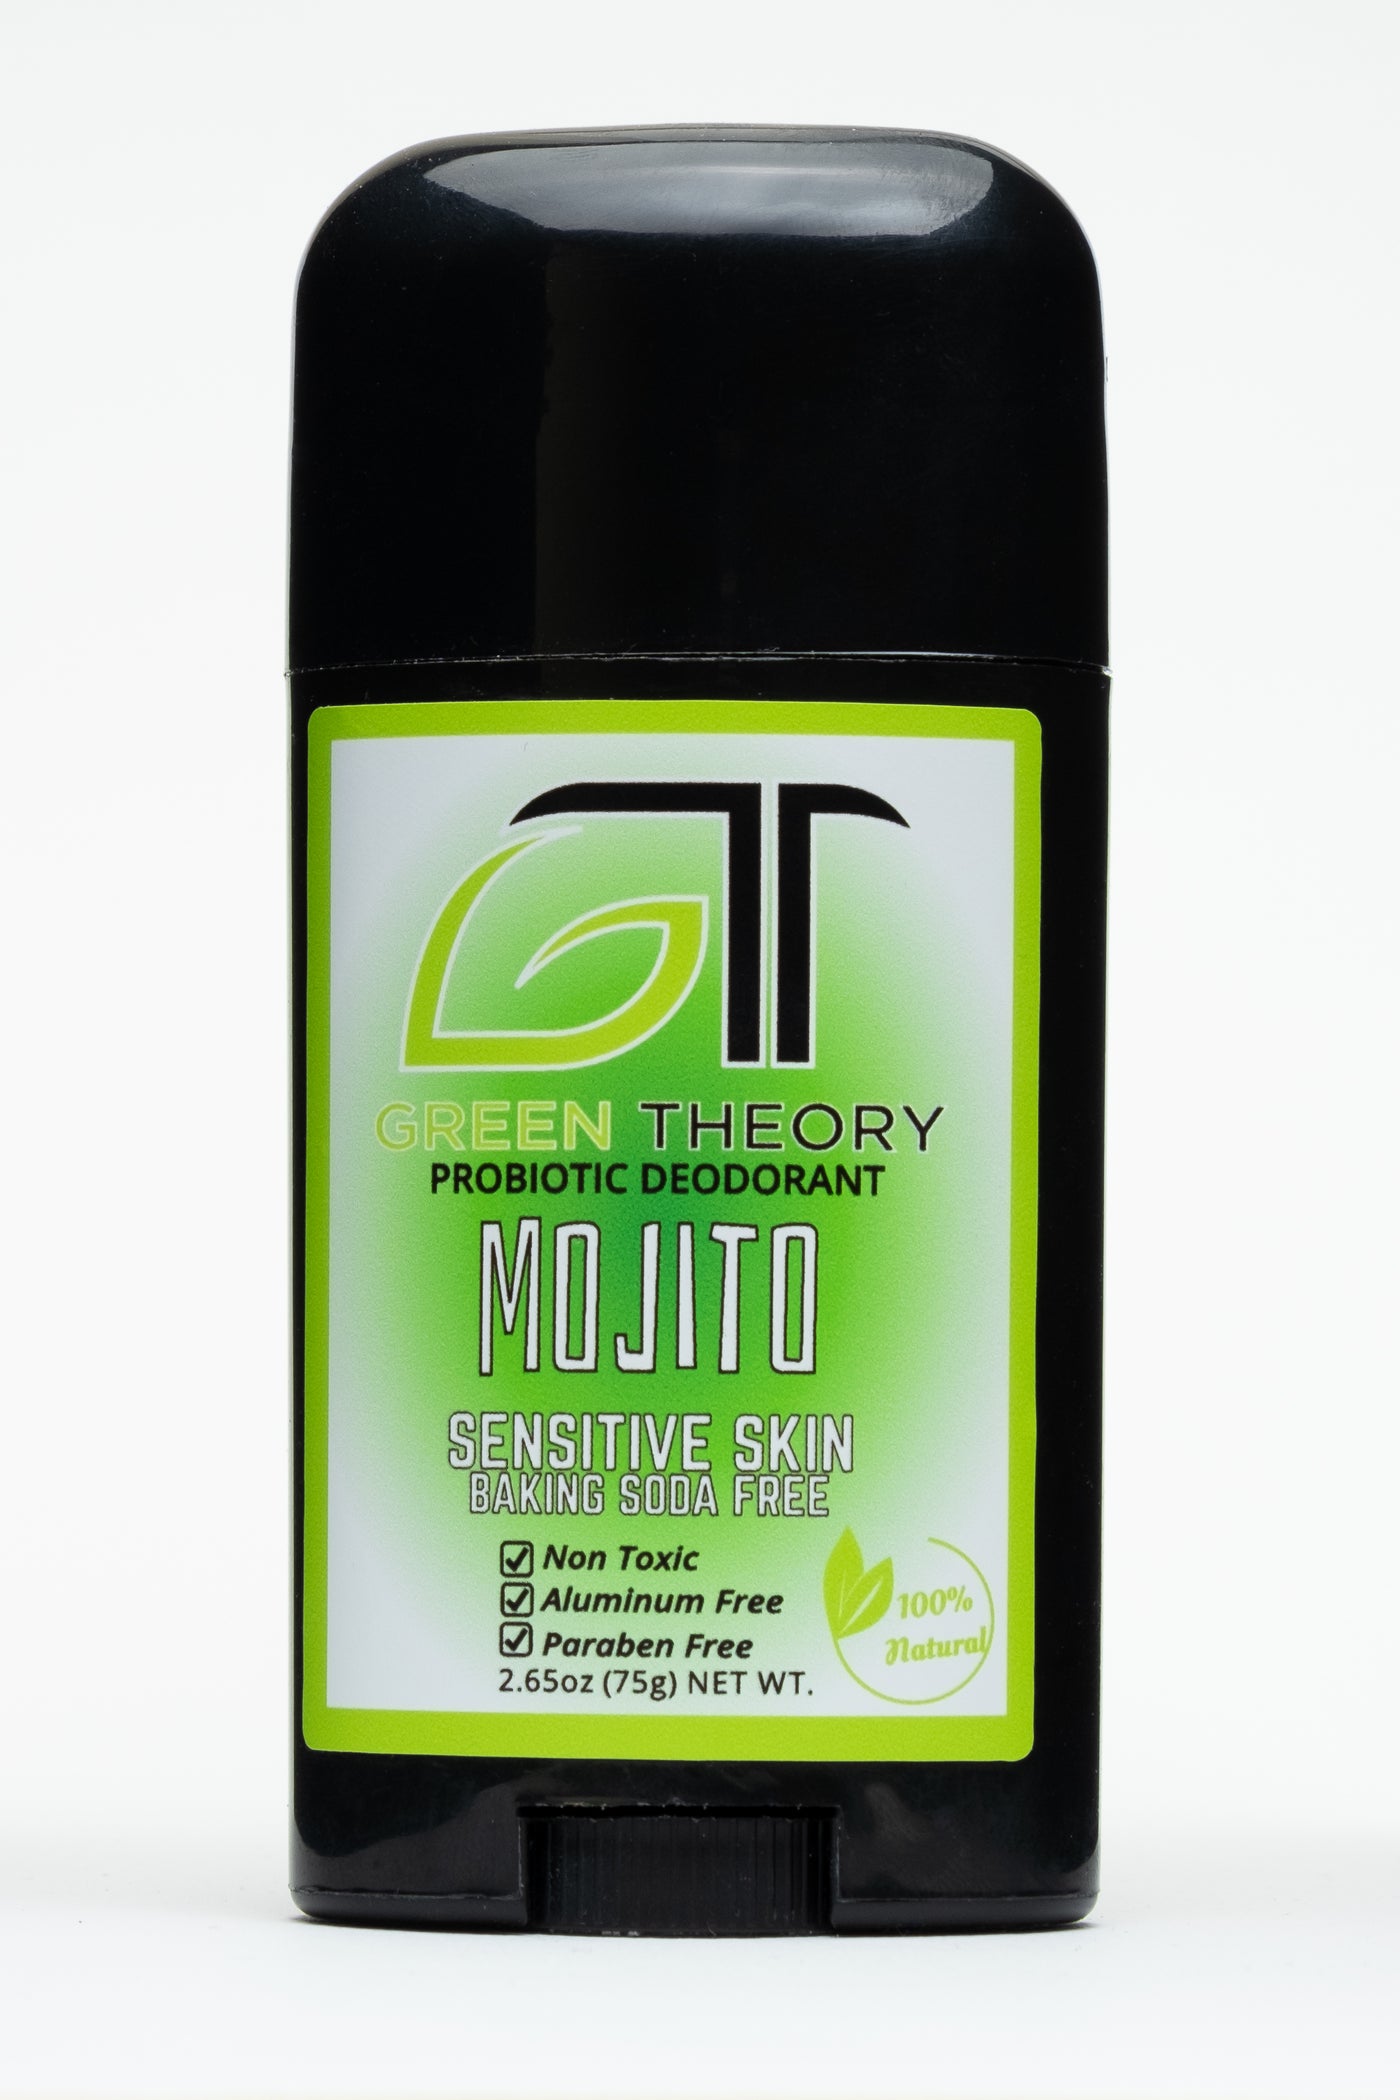 photo of front of green theory mojito baking soda free probiotic natural aluminum free deodorant. Stick is a sleek black plastic and is standing against a white background. The front label is white with a lime green orb and a lime green outline. At the top of the front label is a large GT Green Theory logo with the G in the shape of a leaf. Mojito is written in the middle of the label and the center of the orb. Below it says "sensitve skin" and "baking soda free"